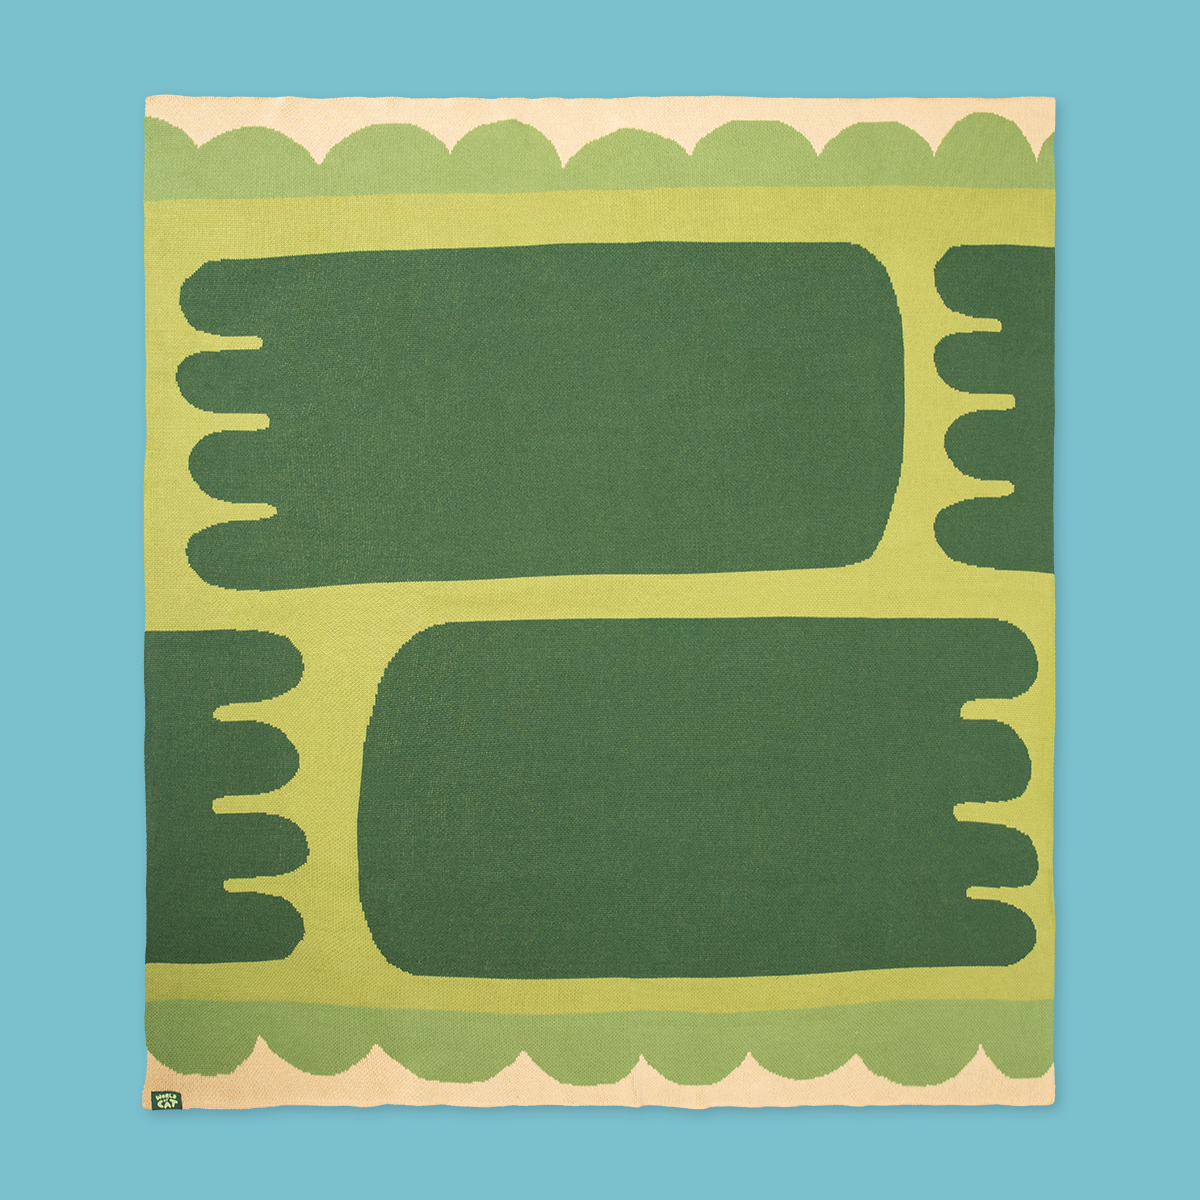 Top down view of blanket. The design has four dark green feet-shaped objects on a light green band with ruffles. The bottom and top edges of the blanket are beige.